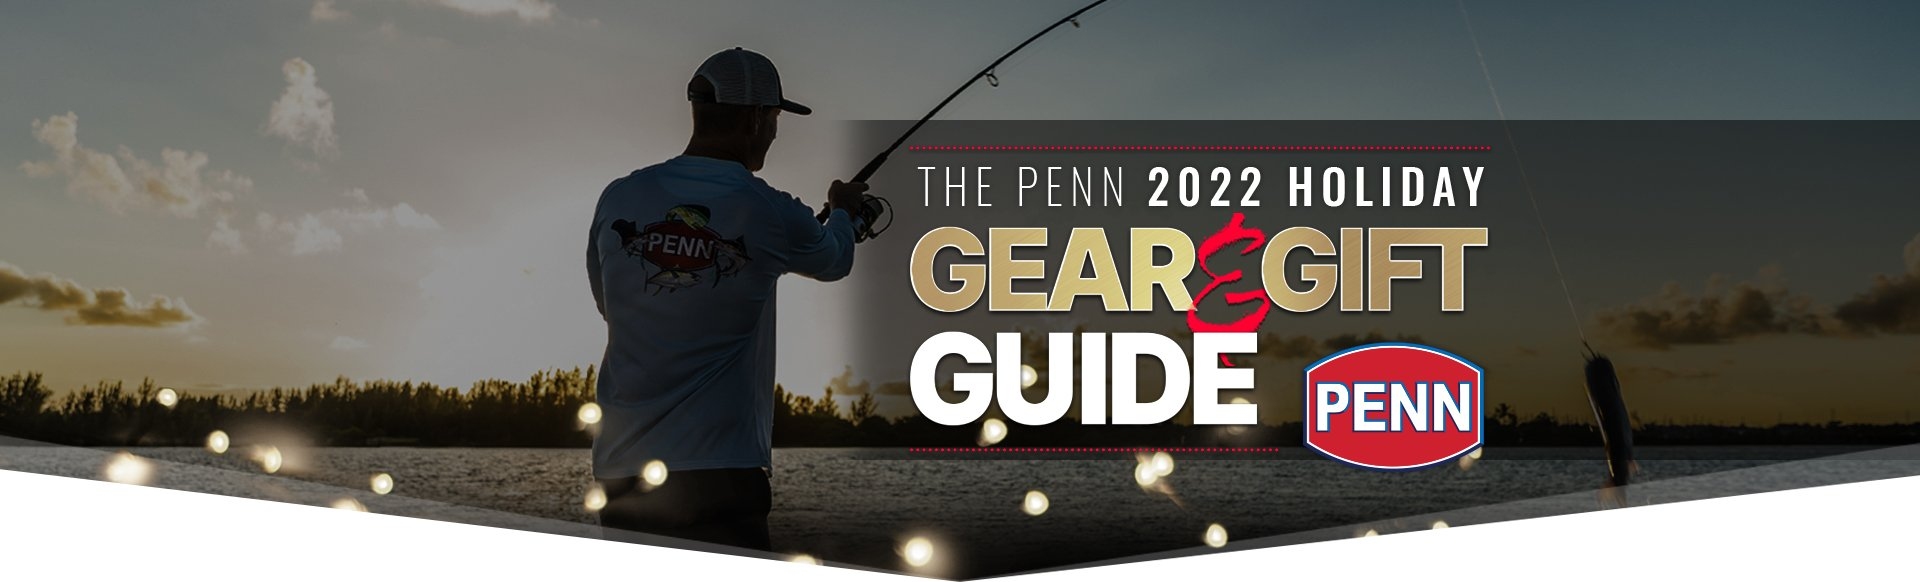 The PENN 2022 Holiday Gear & Gift Guide